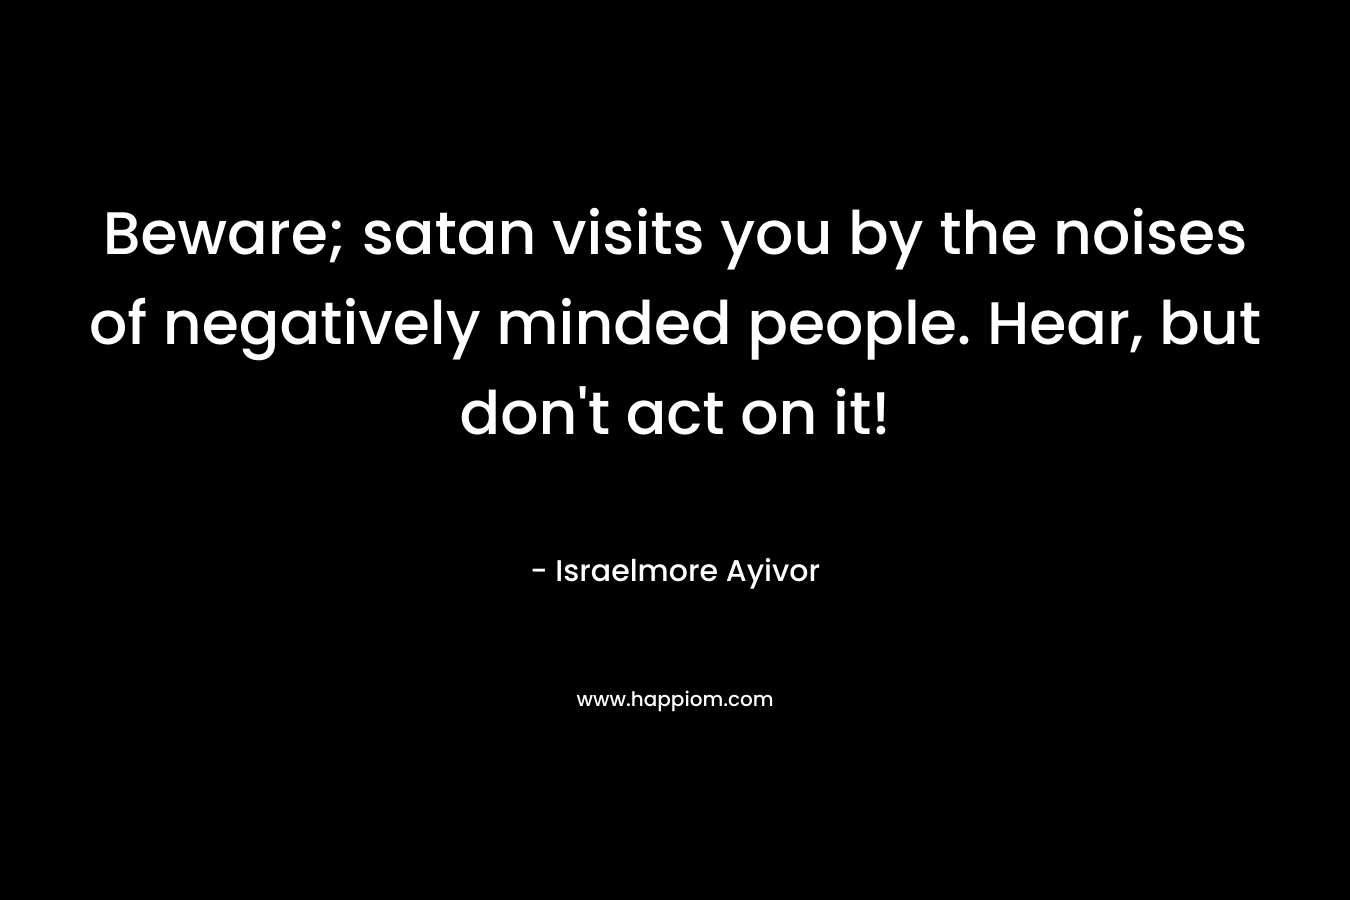 Beware; satan visits you by the noises of negatively minded people. Hear, but don’t act on it! – Israelmore Ayivor